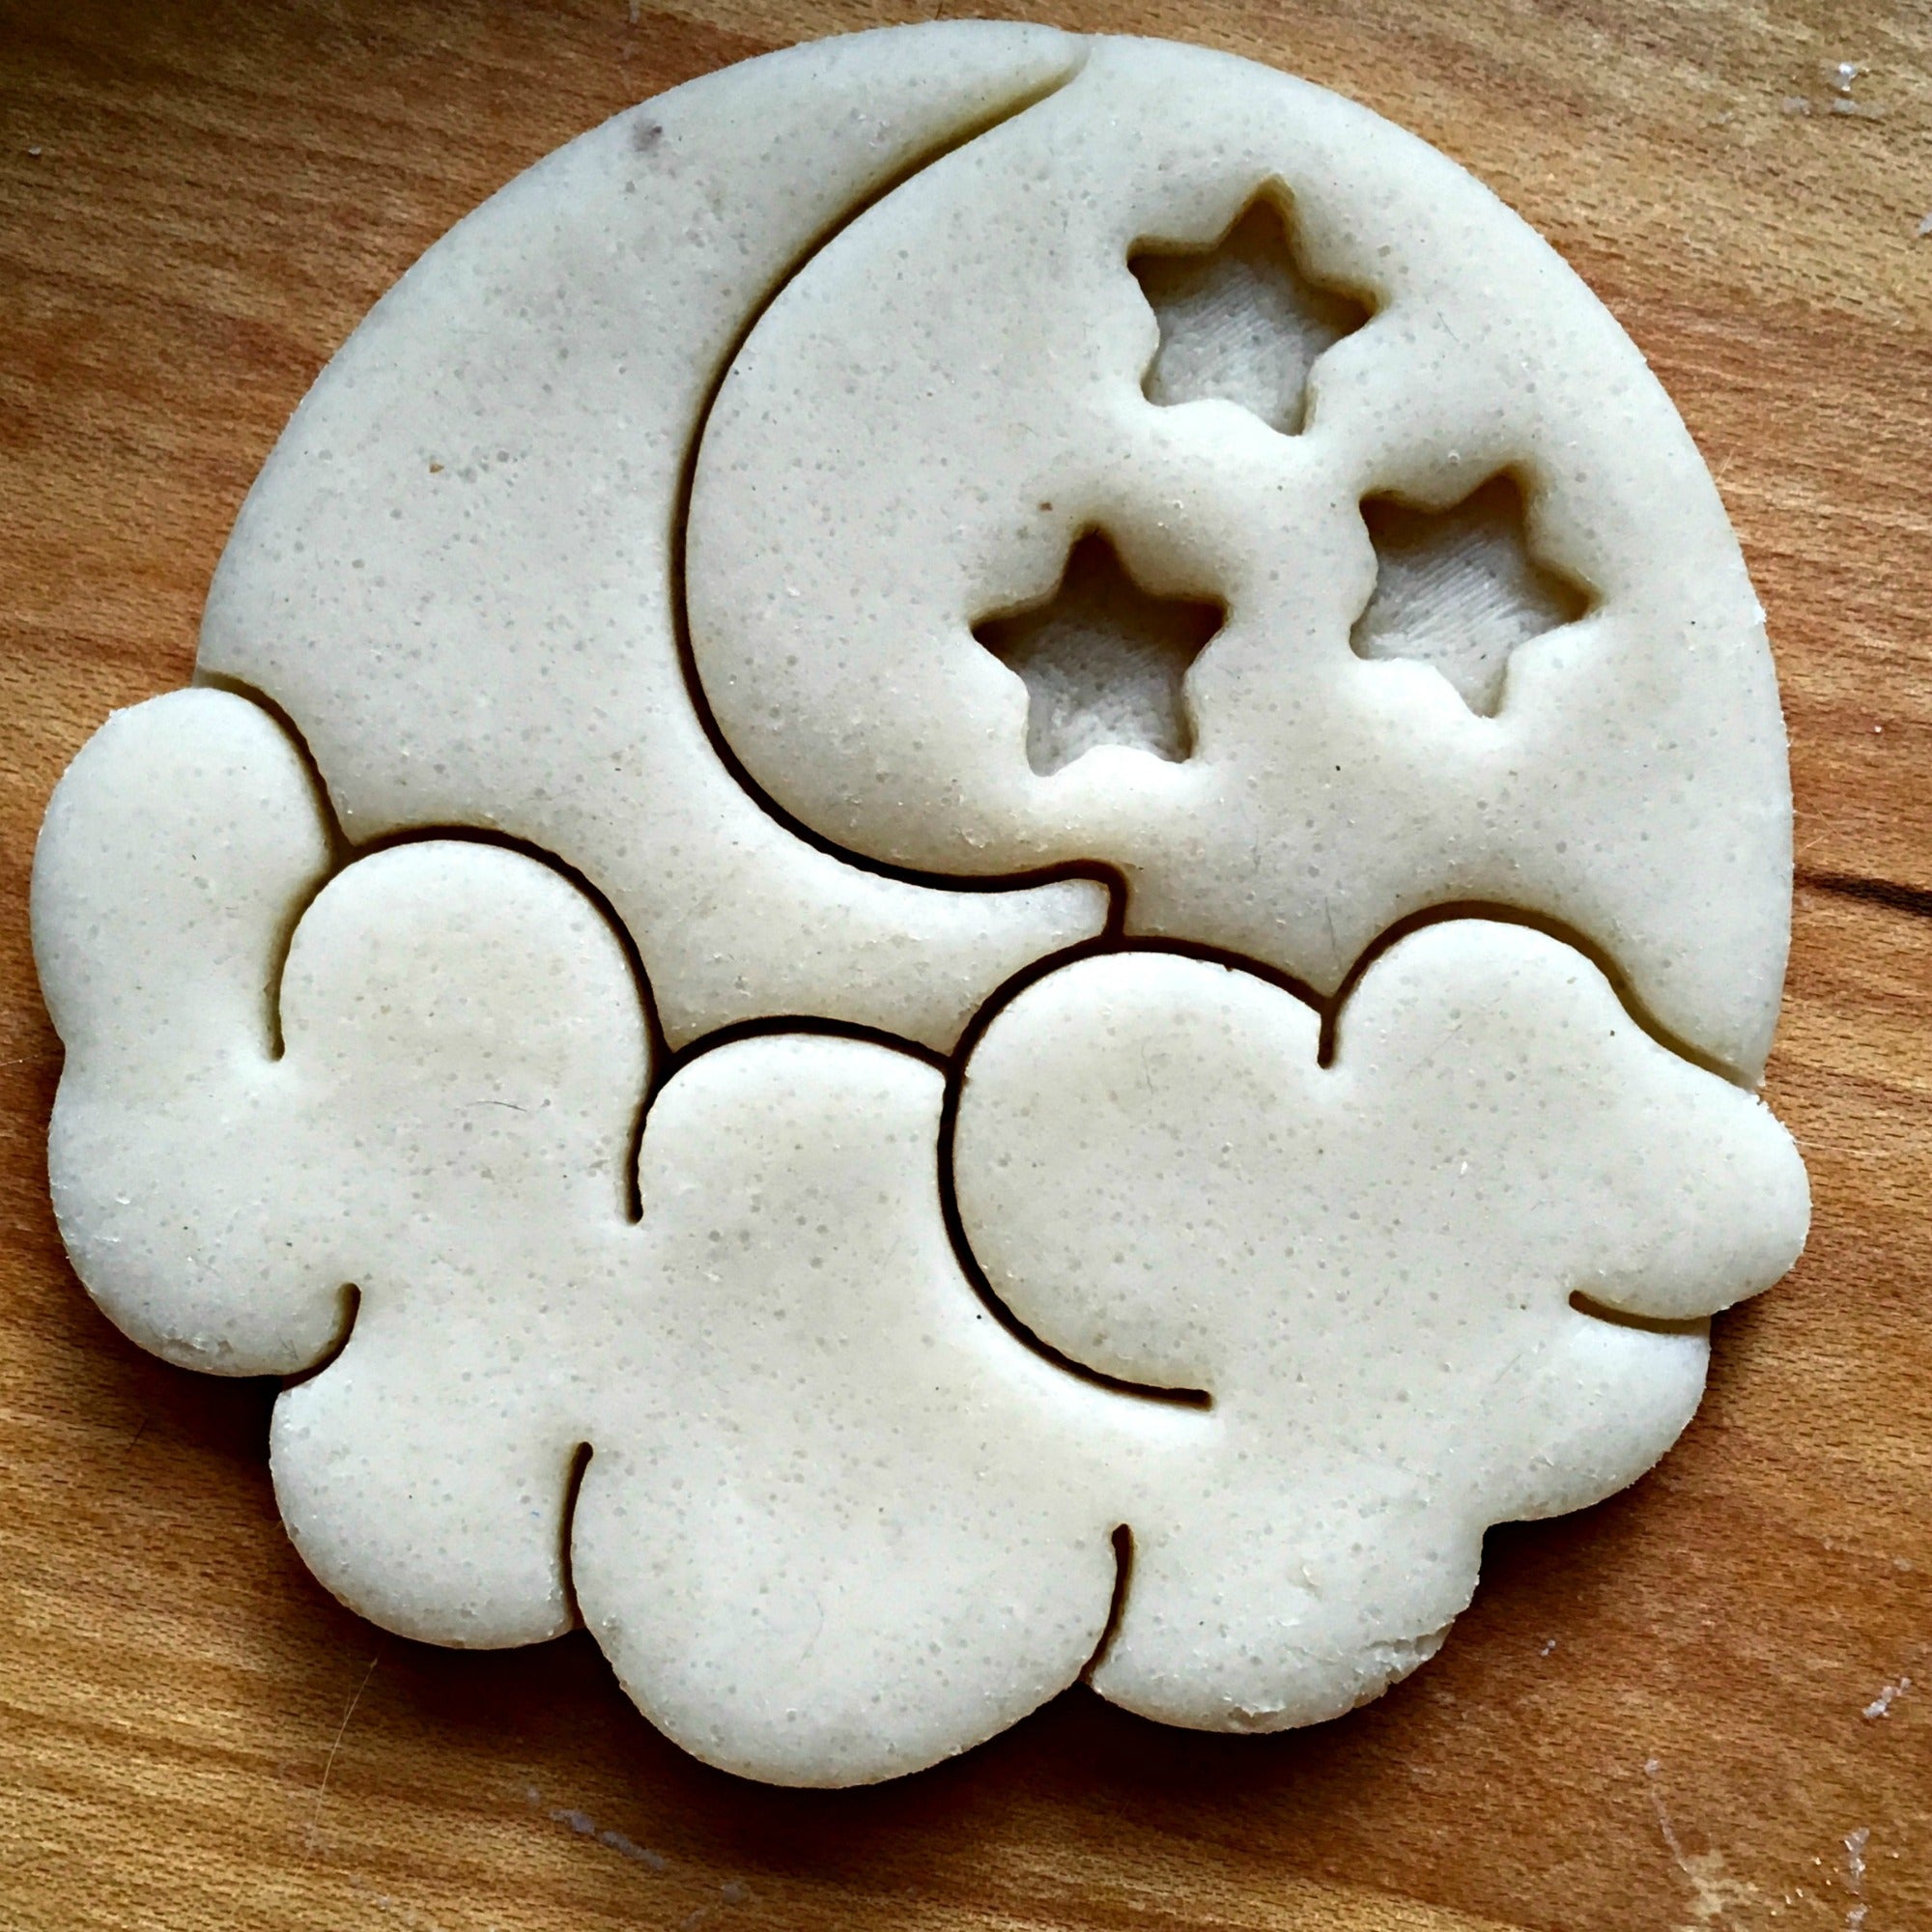 Set of 2 Cloud and Stars Cookie Cutters/Dishwasher Safe